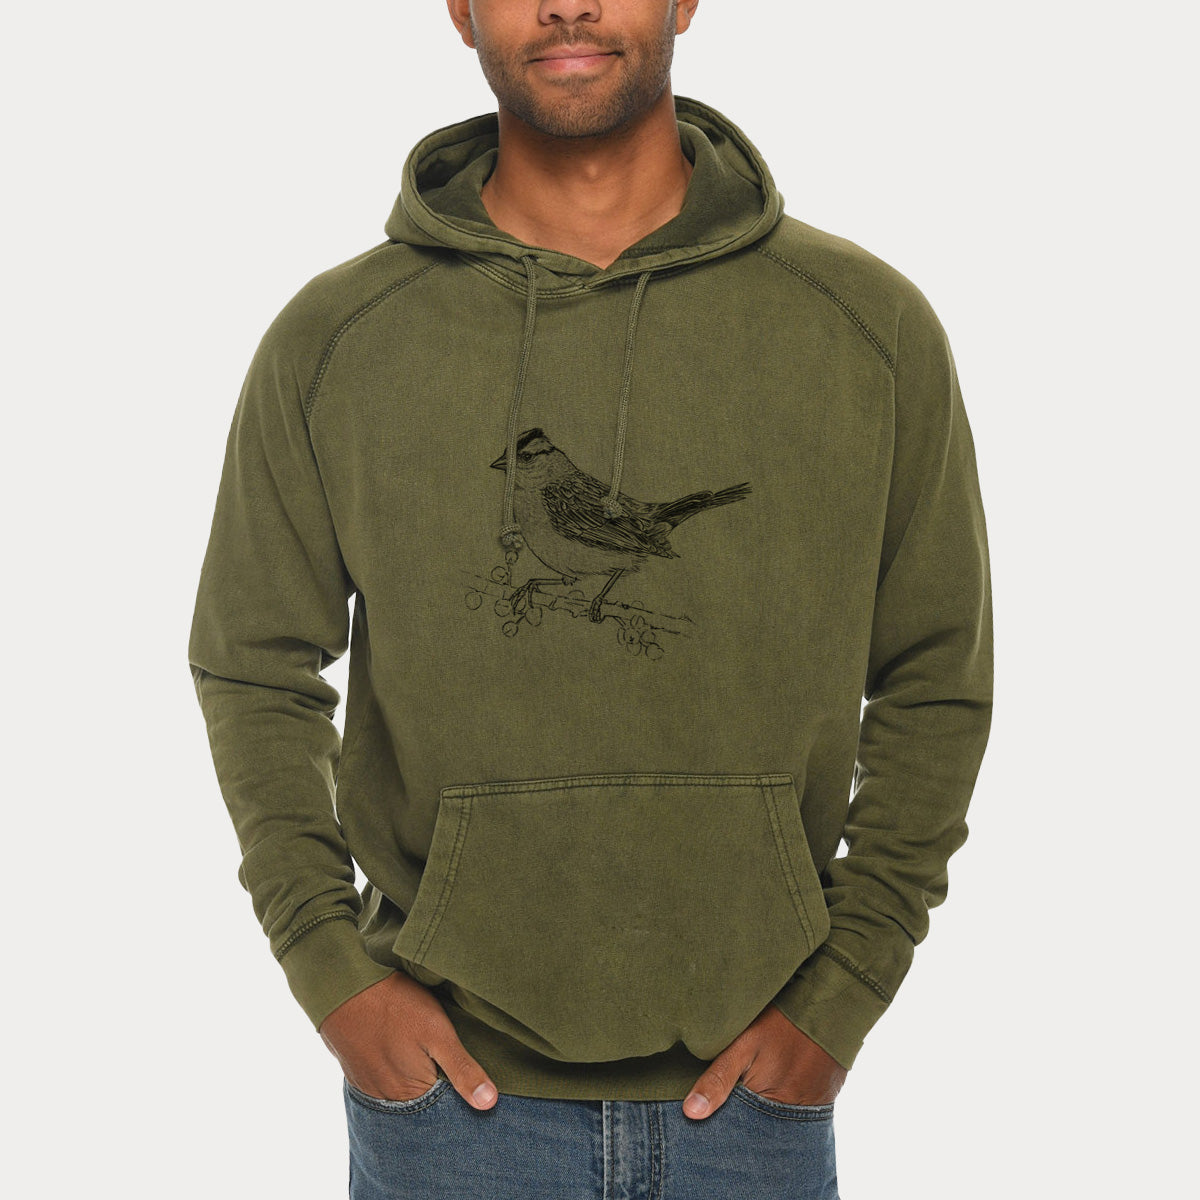 White-crowned Sparrow - Zonotrichia leucophrys  - Mid-Weight Unisex Vintage 100% Cotton Hoodie